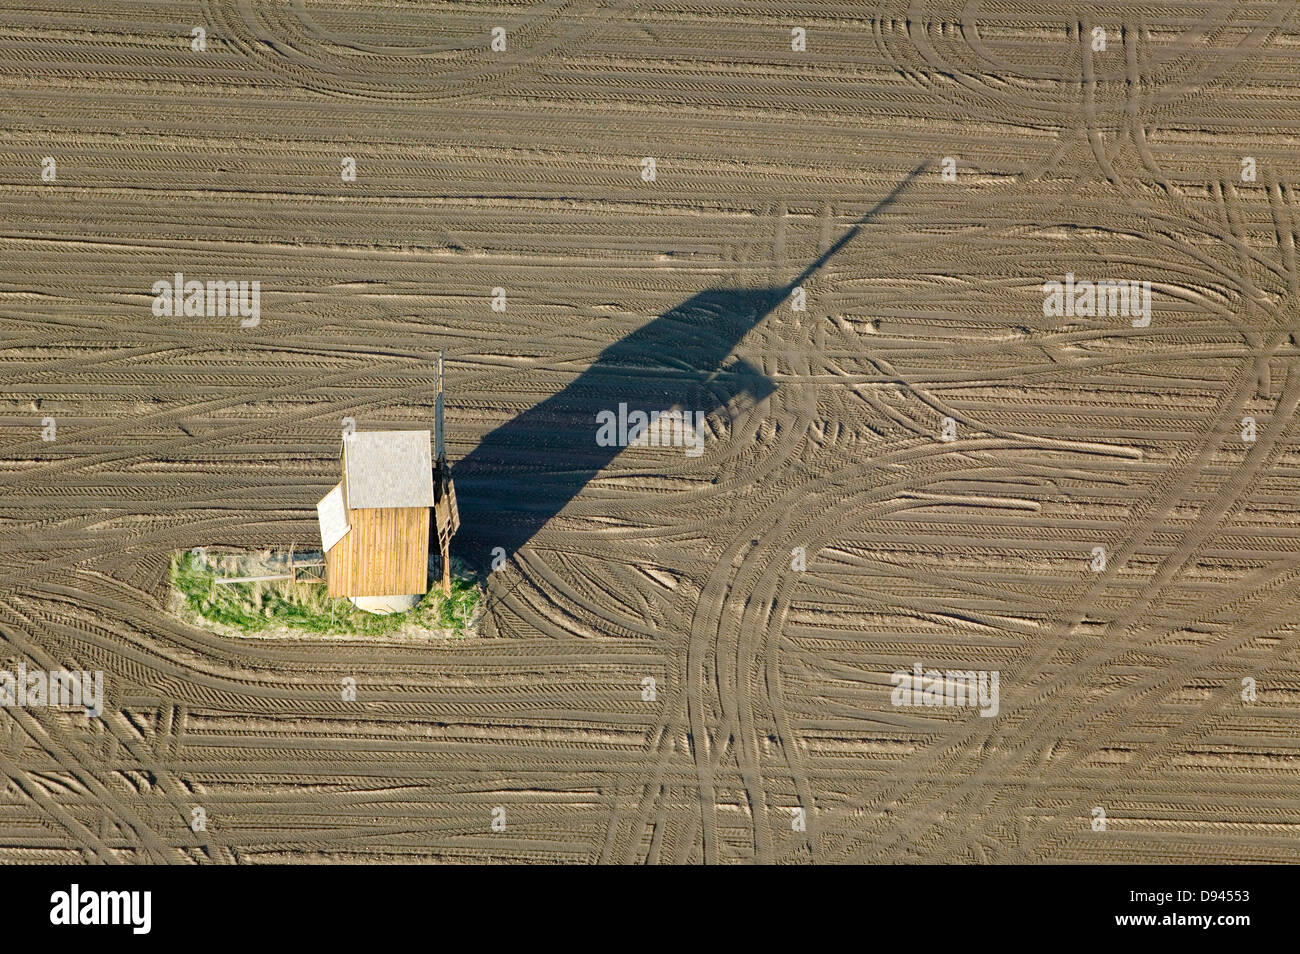 A windmill on a cropland, Gotland, Sweden. Stock Photo